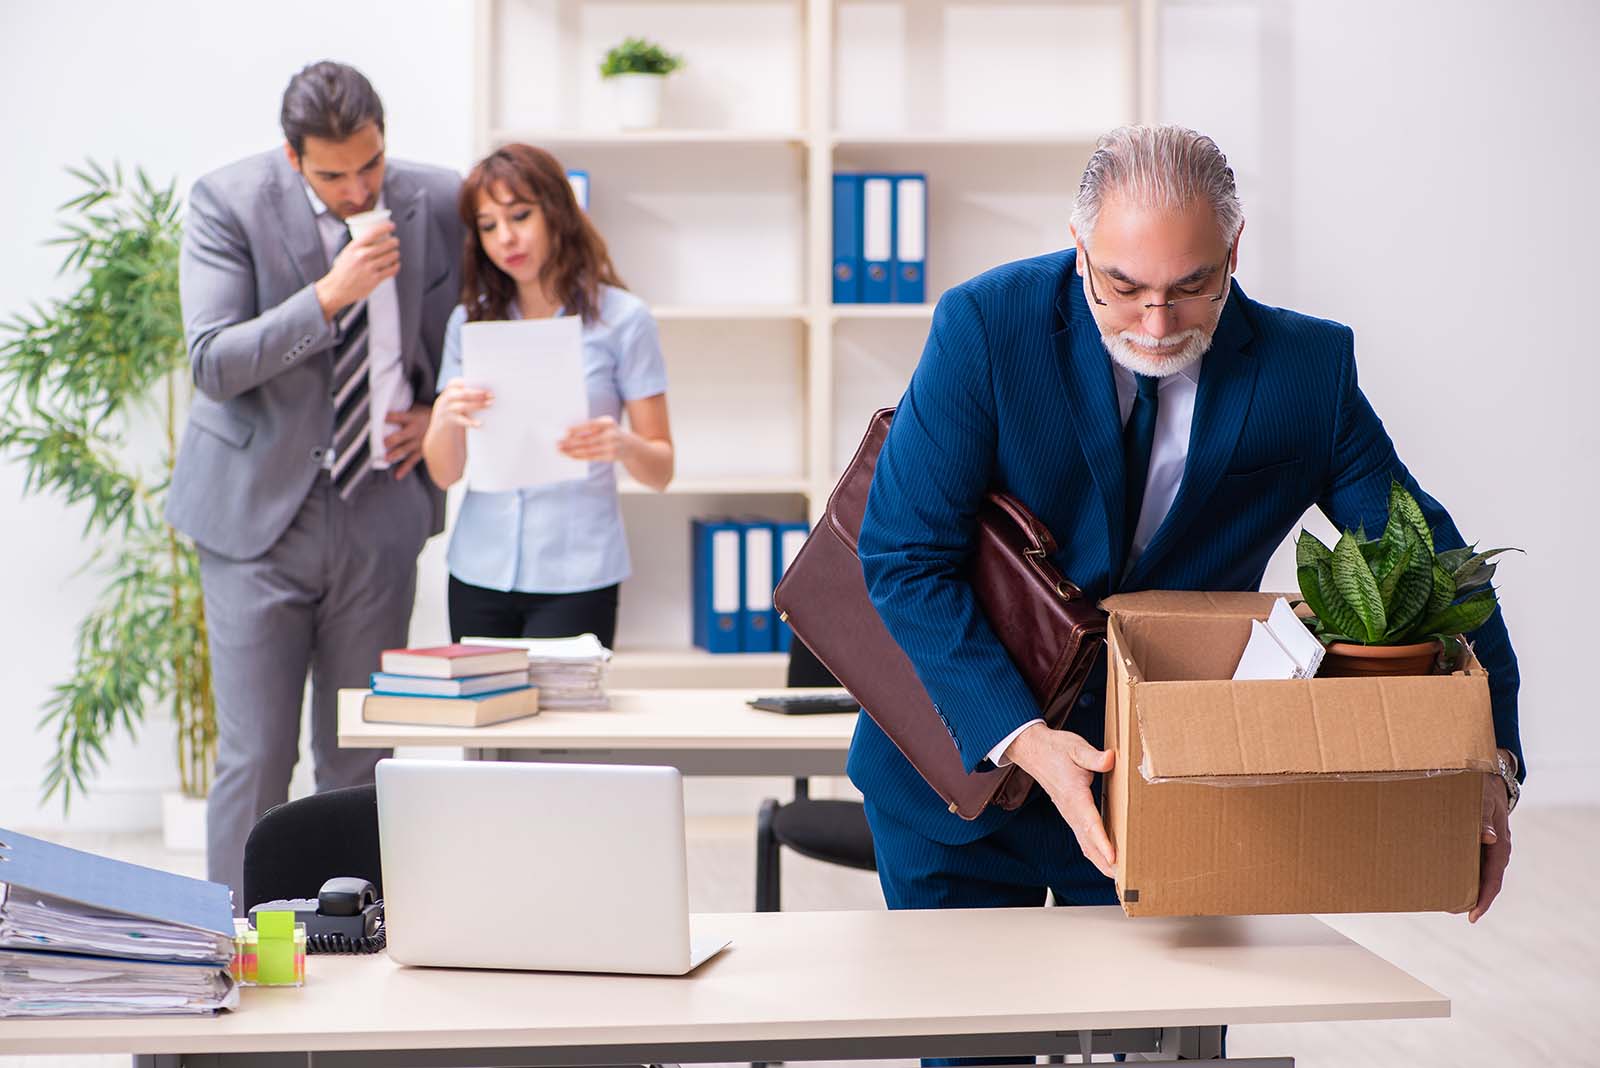 man placing box on desk to move into new job, with to coworkers in background